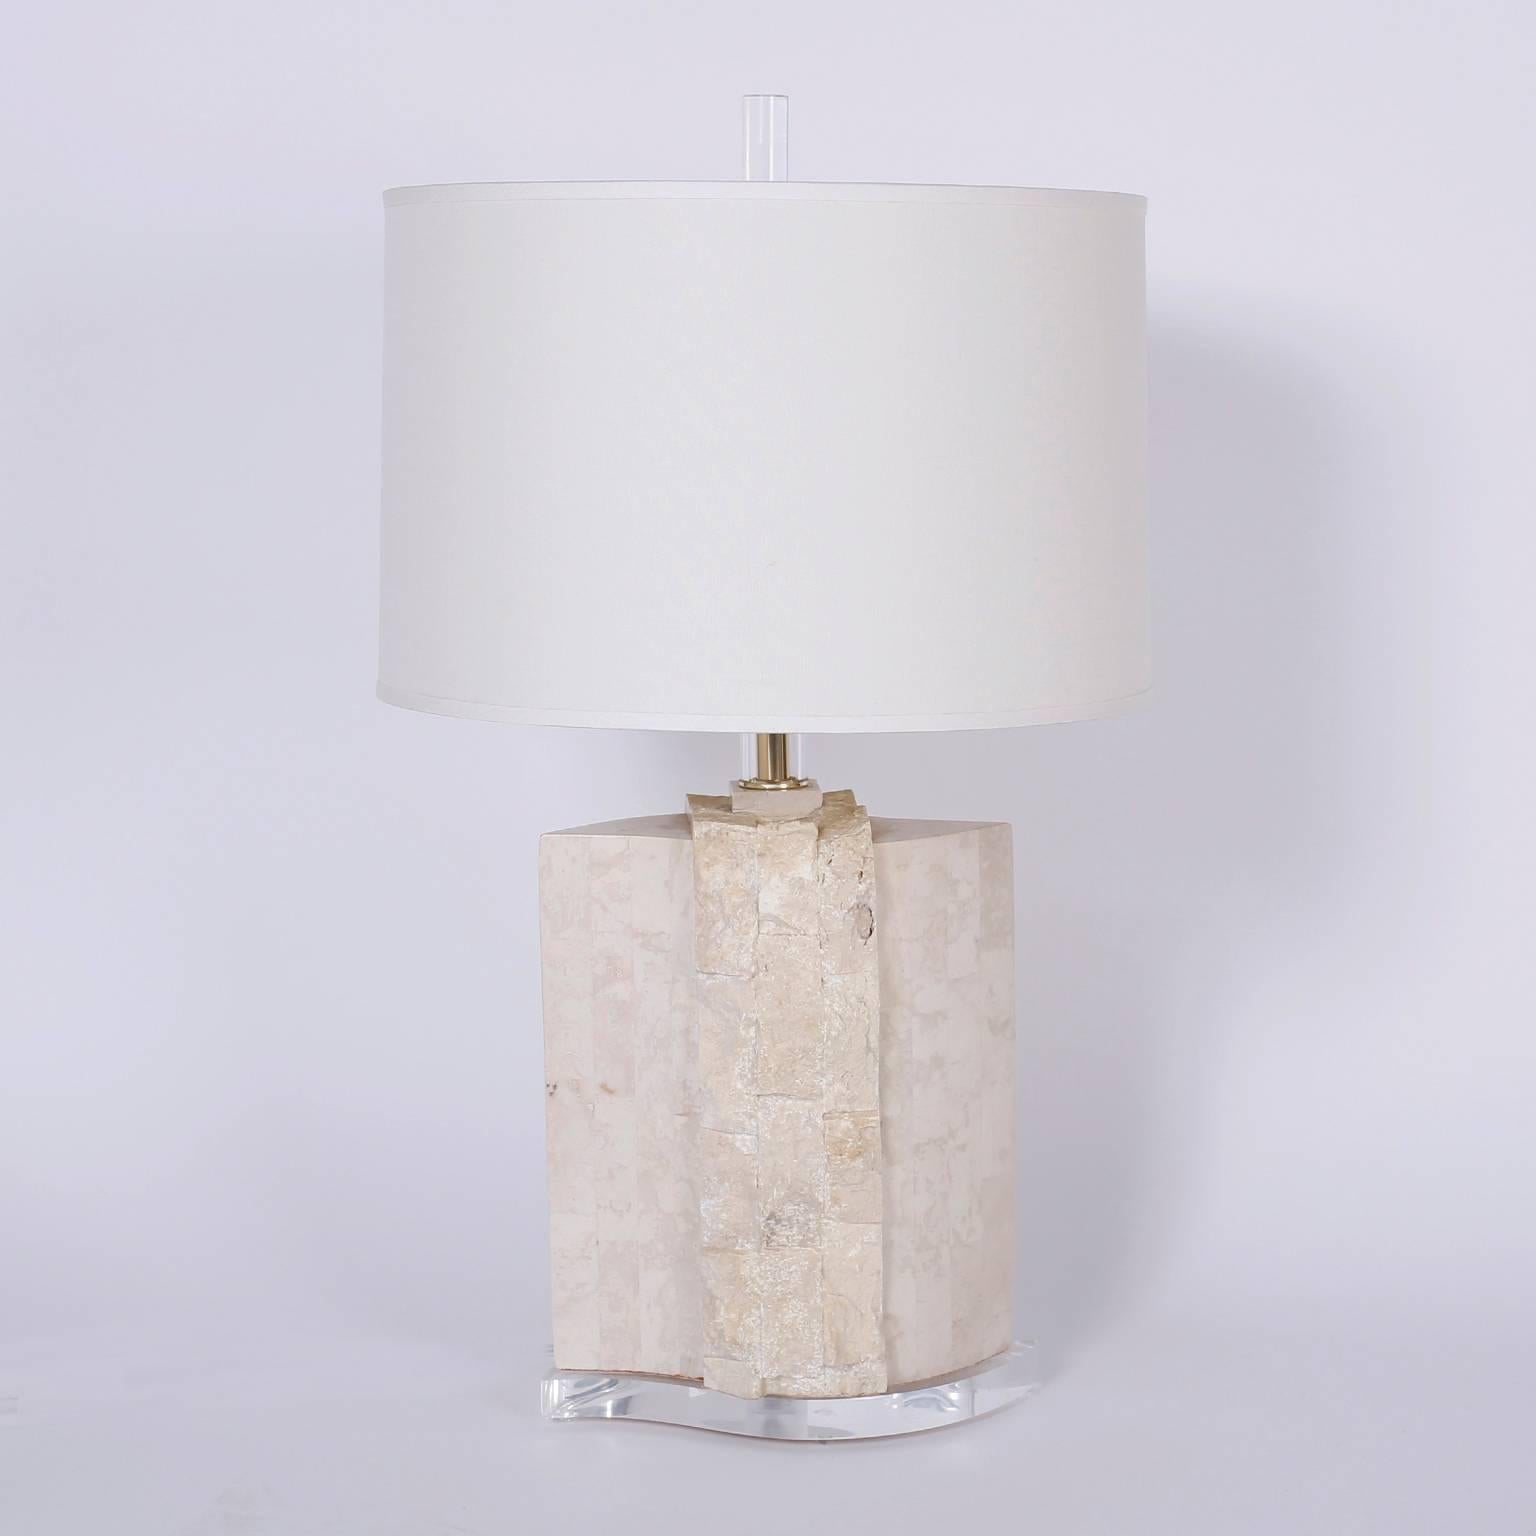 Chic midcentury pair of table lamps crafted in blocks of stone both polished and natural. Featuring Lucite finials, stems, and bases.